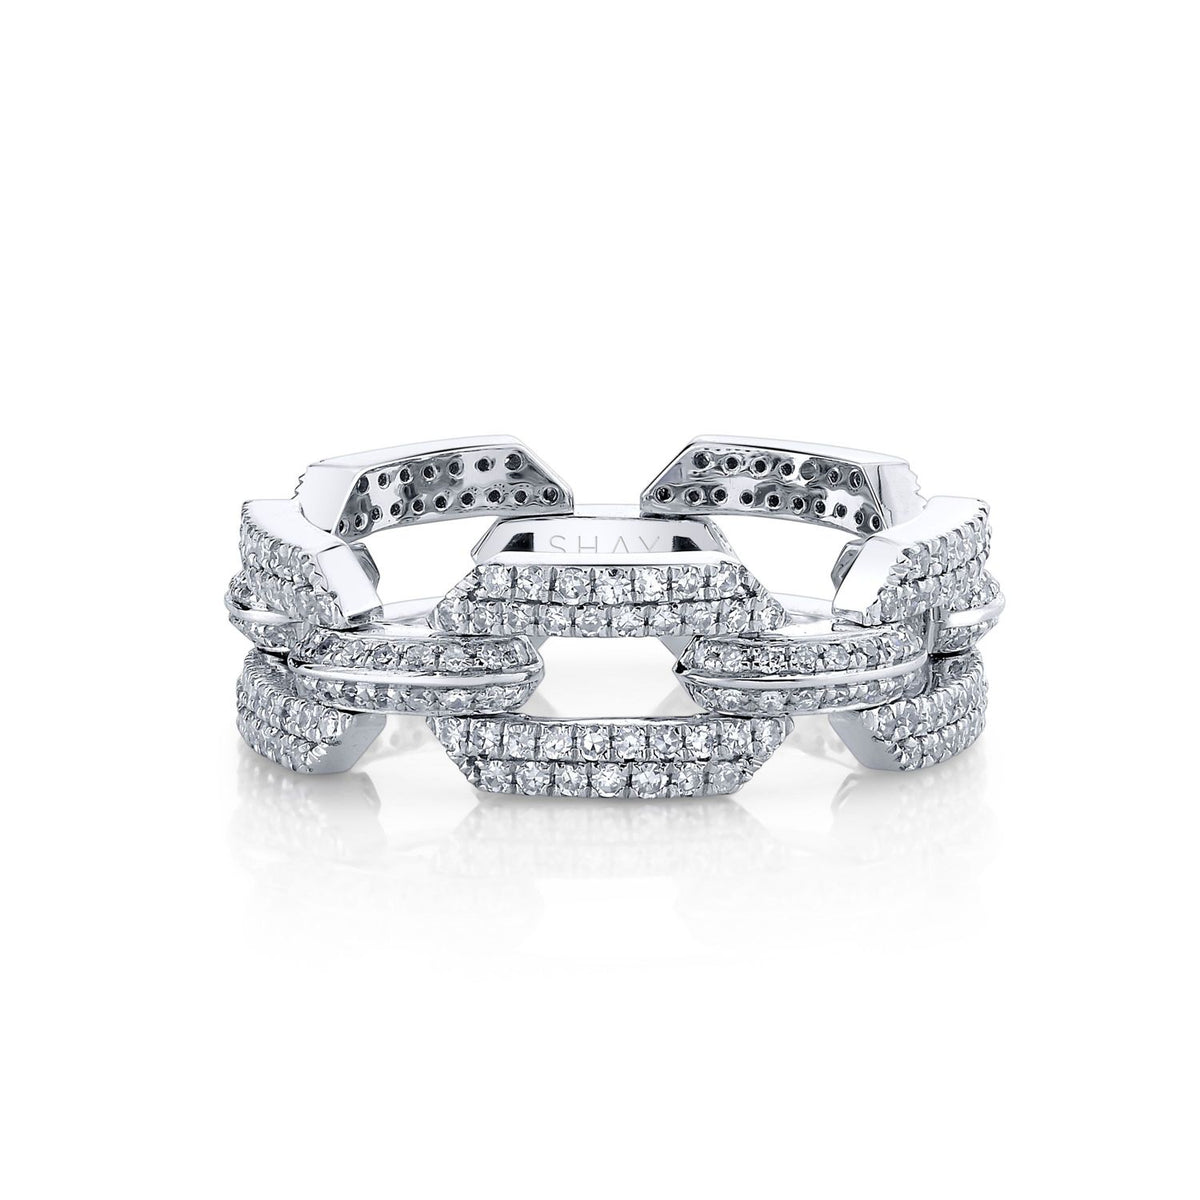 DIAMOND PAVE DOME FLAT LINK RING